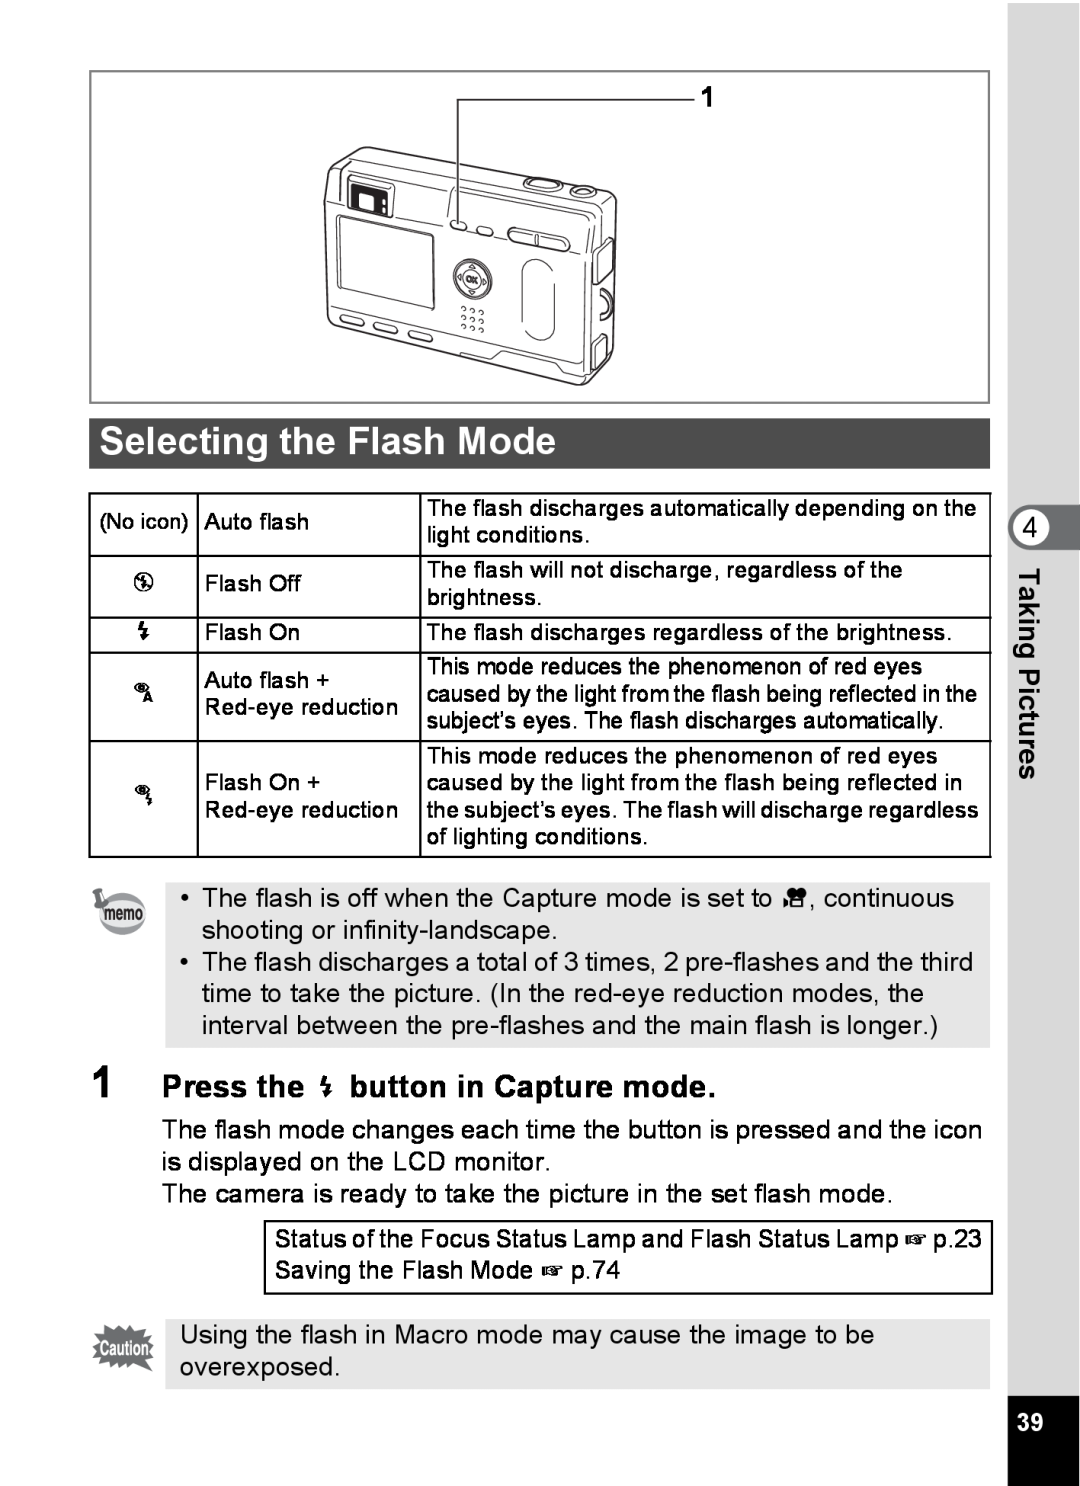 Pentax S4 manual Selecting the Flash Mode, Press the b button in Capture mode 